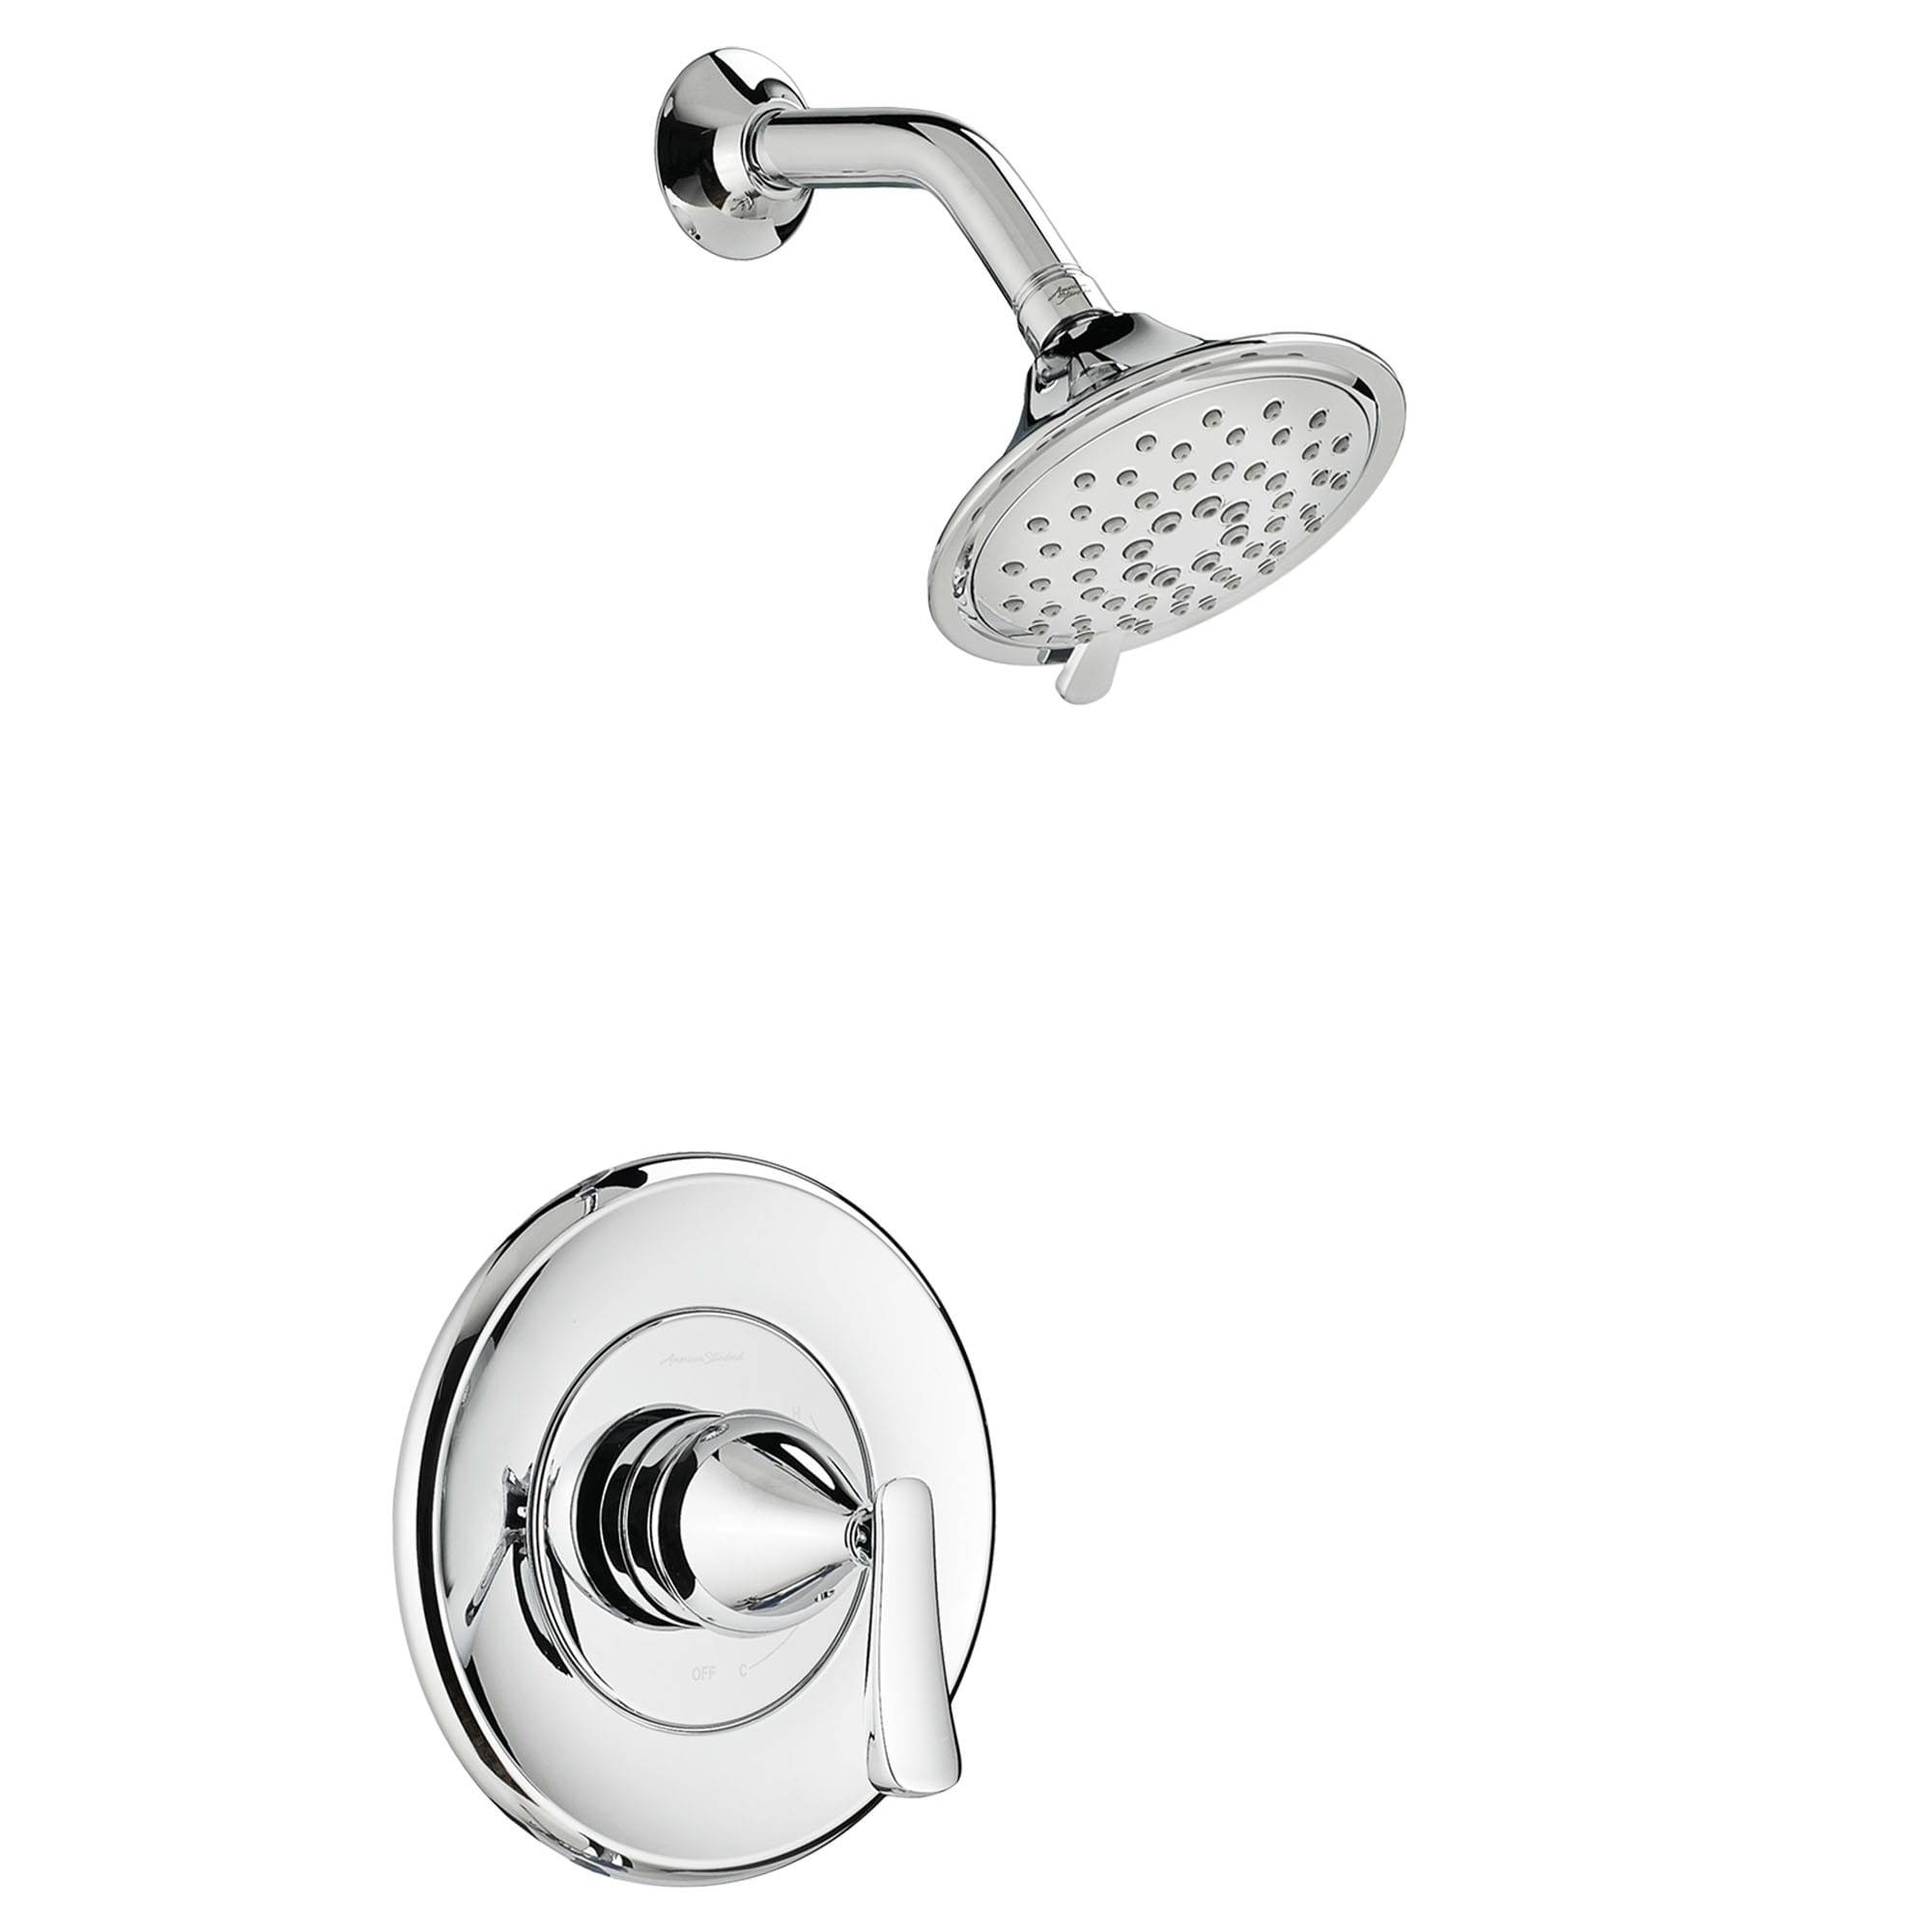 Chatfield 1.8 GPM Shower Trim Kit with Ceramic Disc Valve Cartridge and Lever Handle